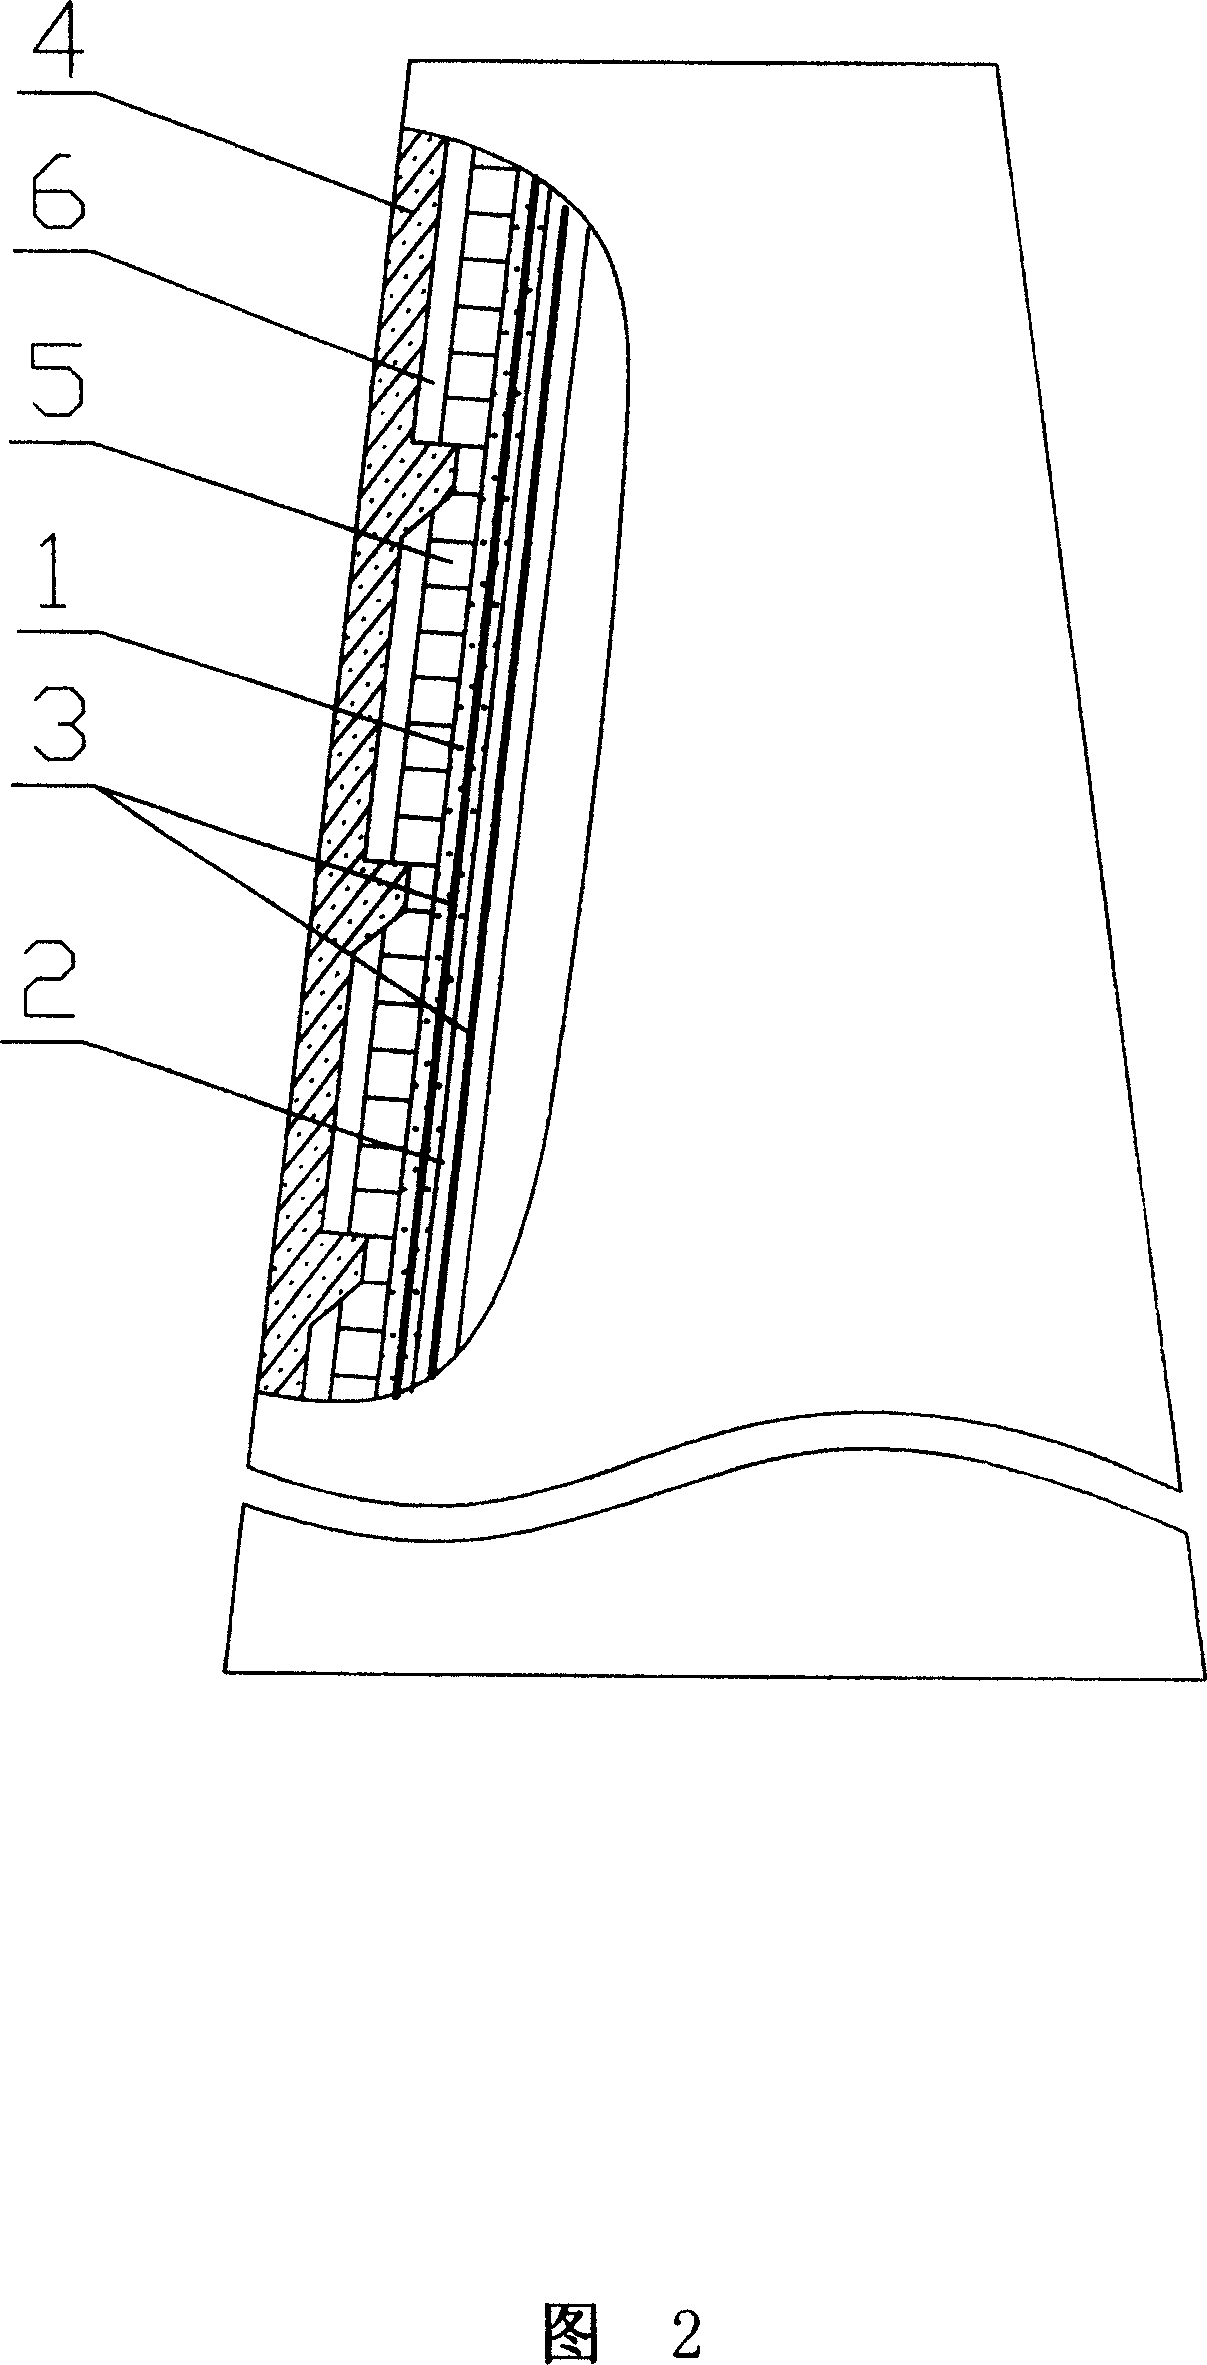 Boiler chimney body and method for forming its inner wall protection structure